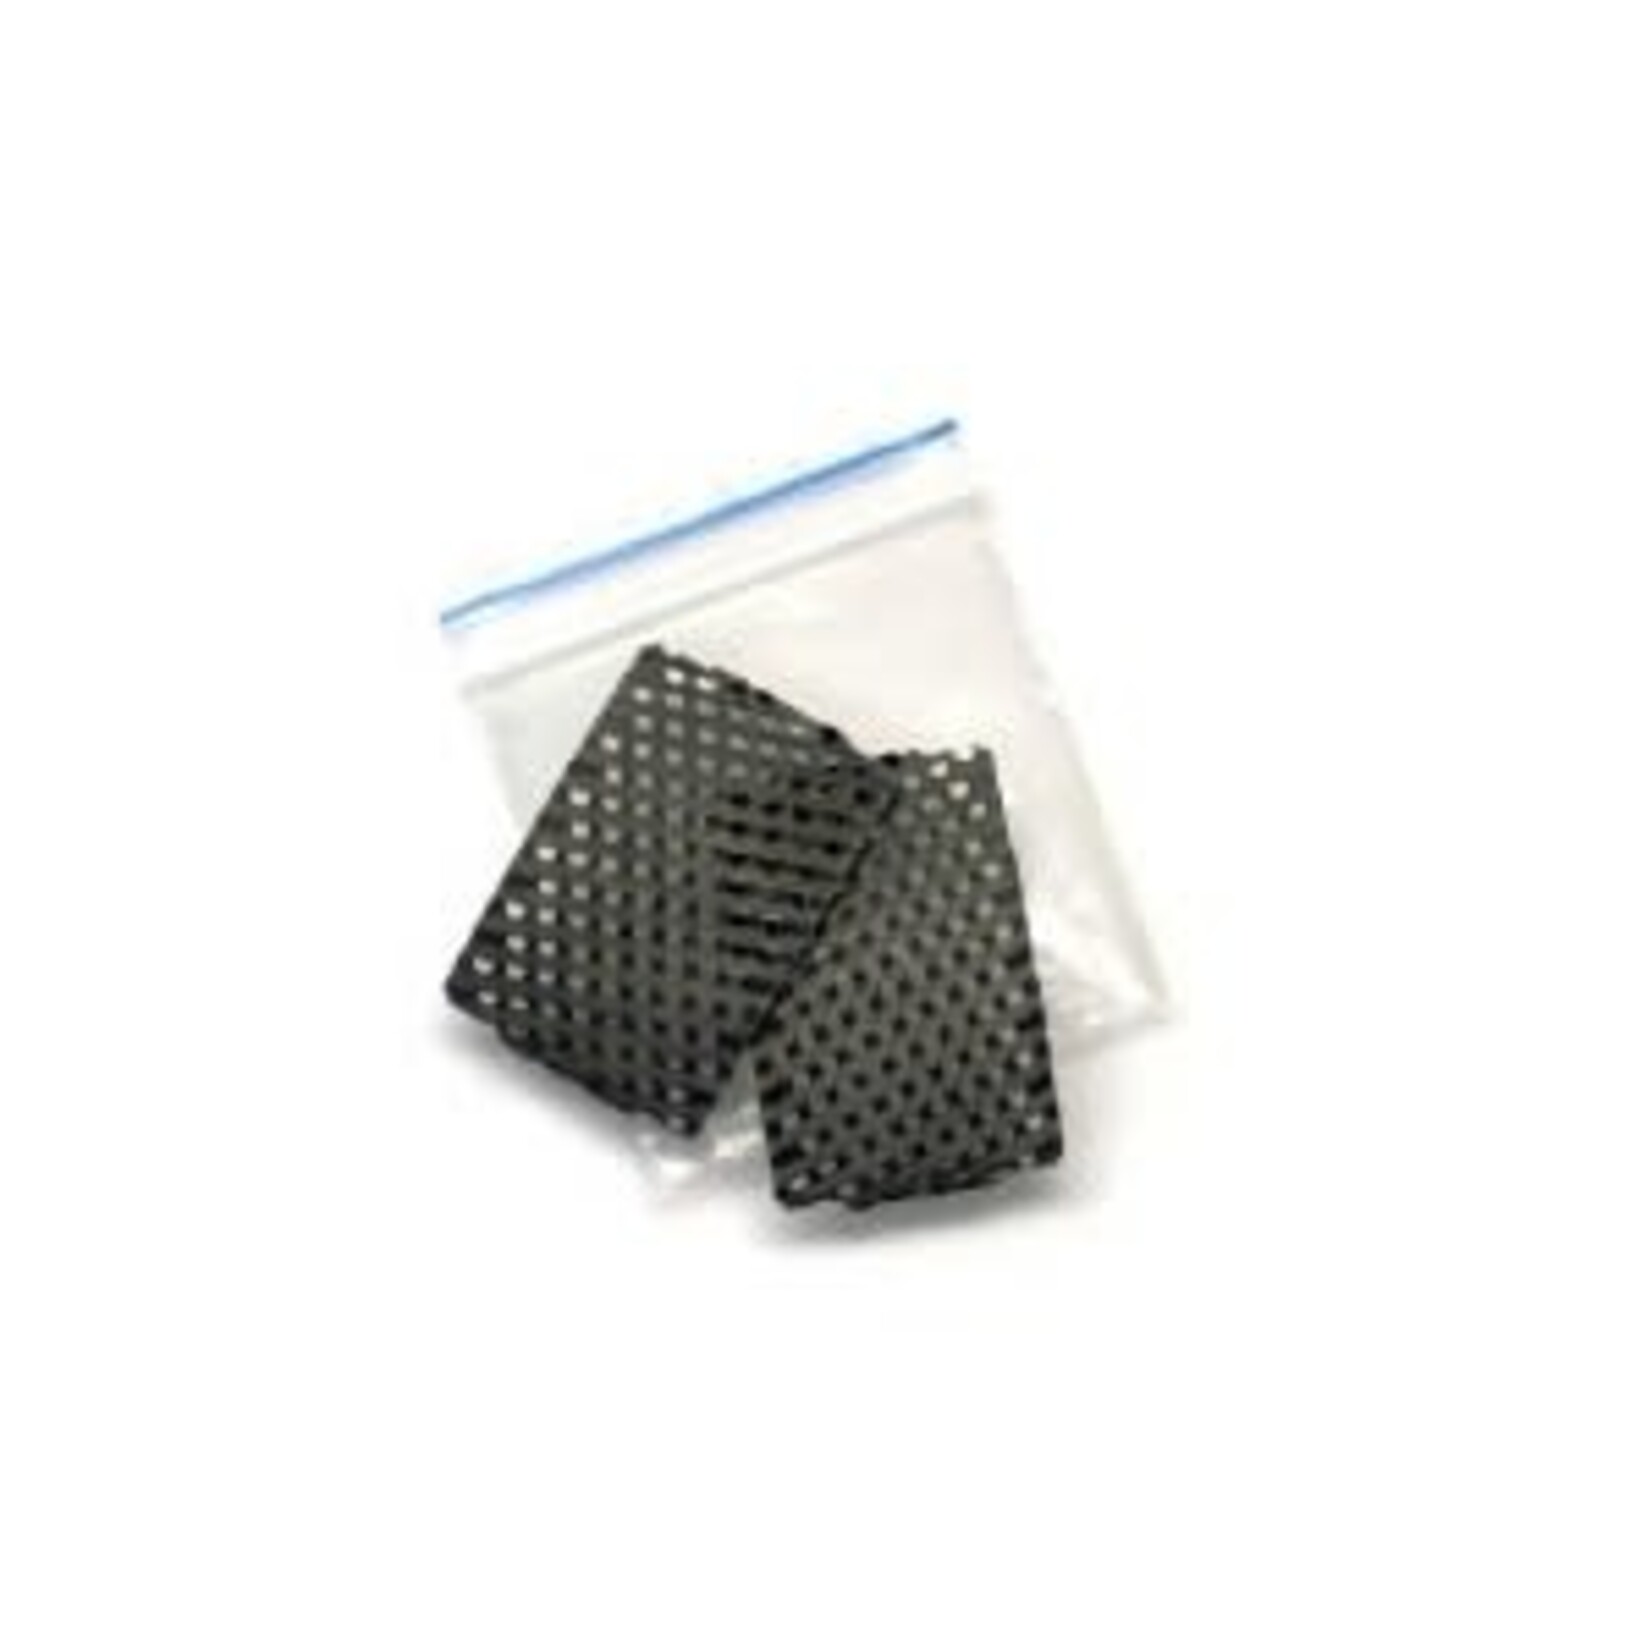 Mudtools SMALL SHREDDER BLADE REPLACEMENTS (SET OF 2)